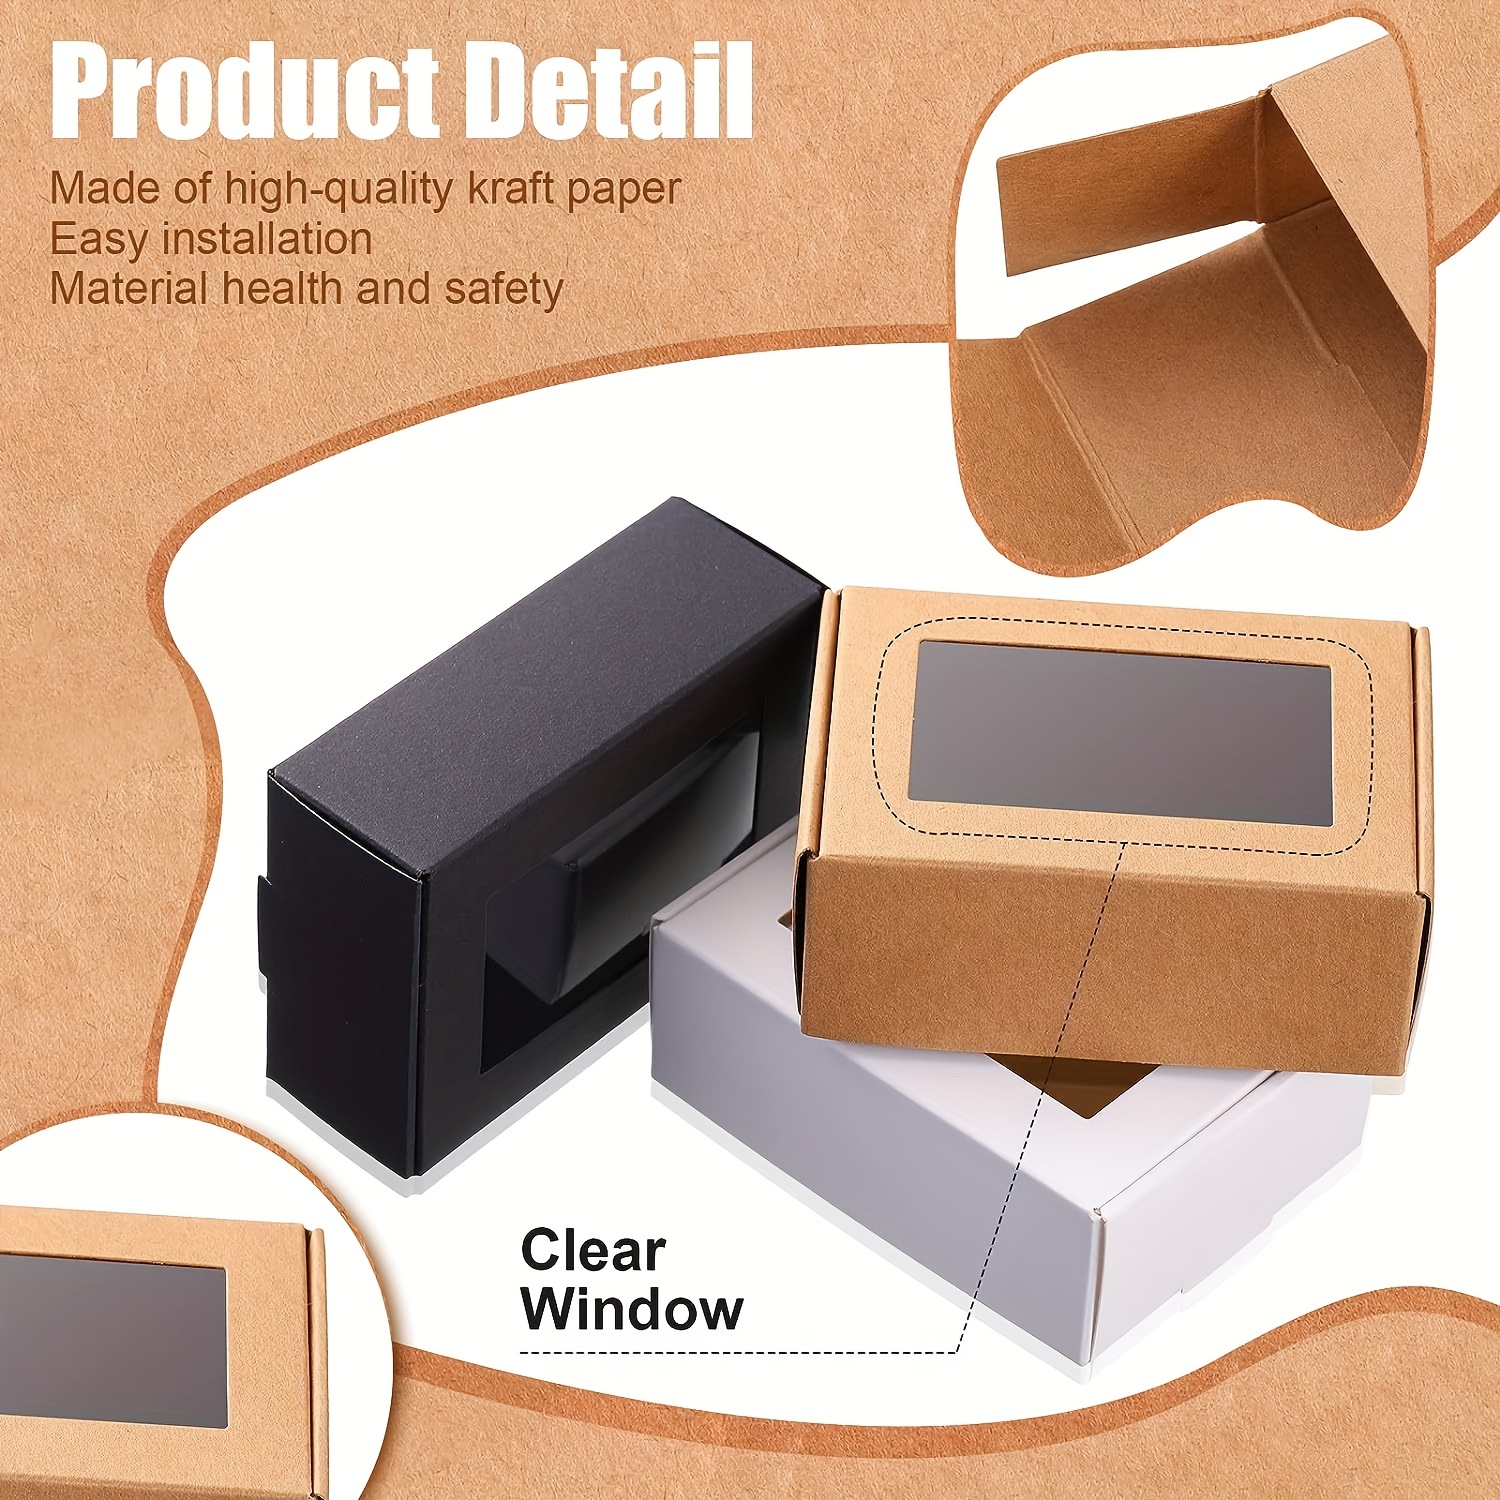 30Pcs Soap Packaging Boxes Kraft Paper Soap Box with Window Gift